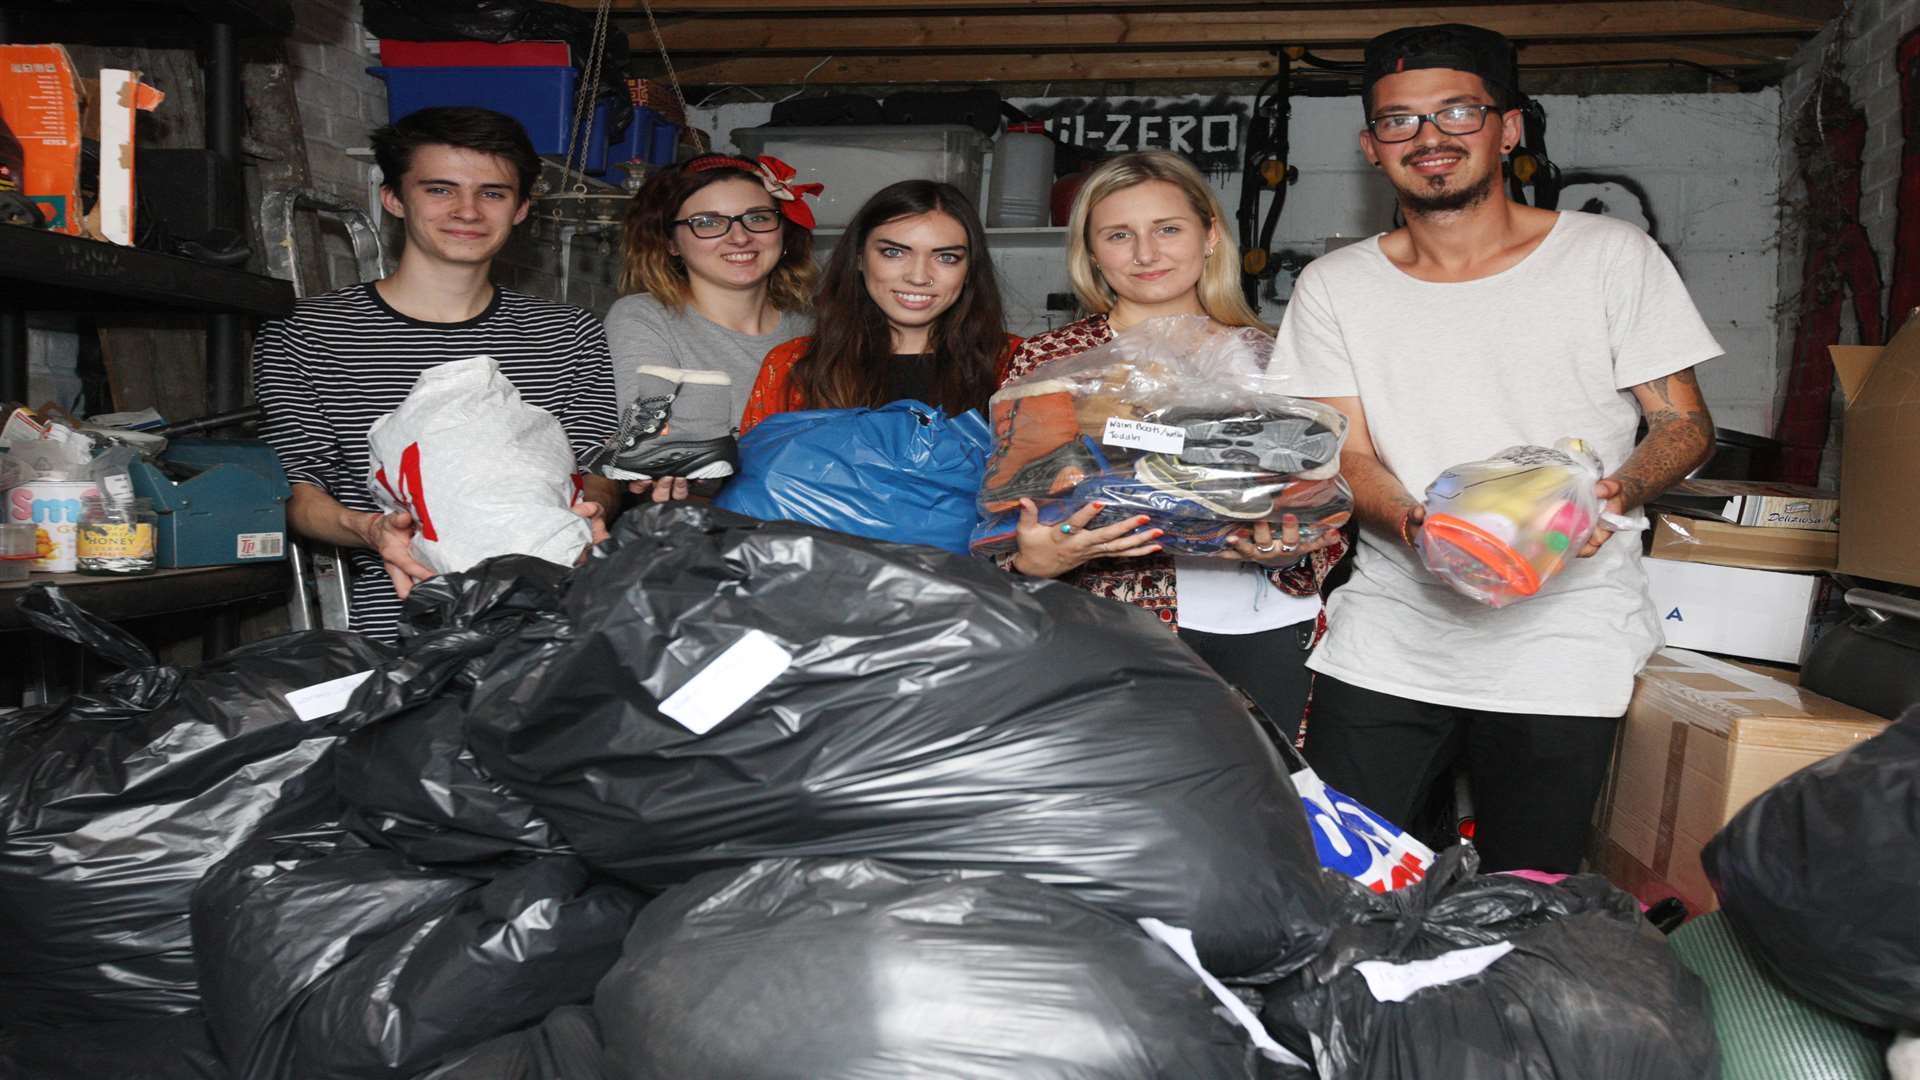 The group with some of the donated clothing. Picture: John Westhrop